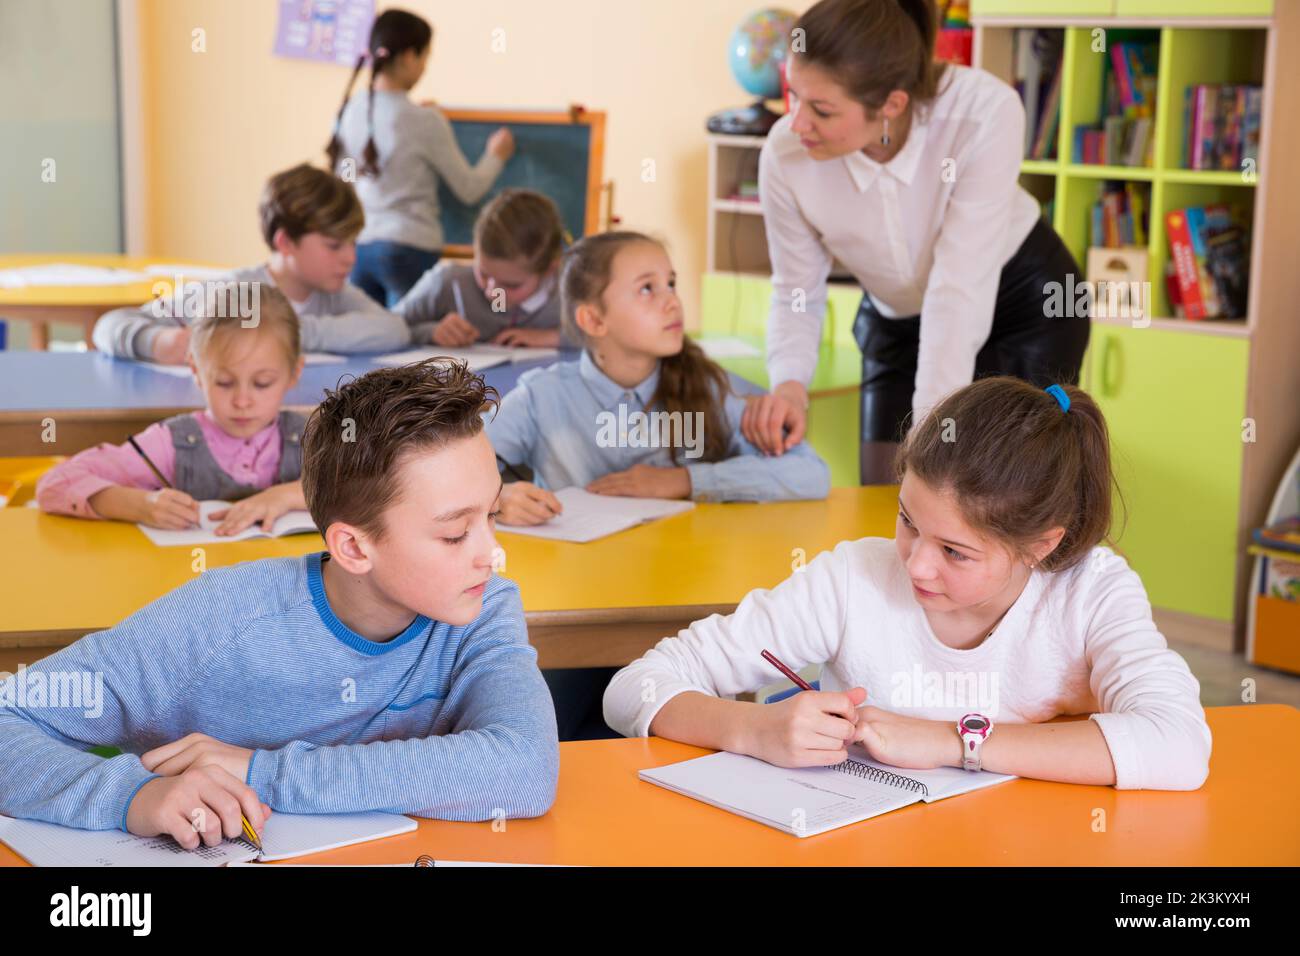 Teacher and pupils working in classroom Stock Photo